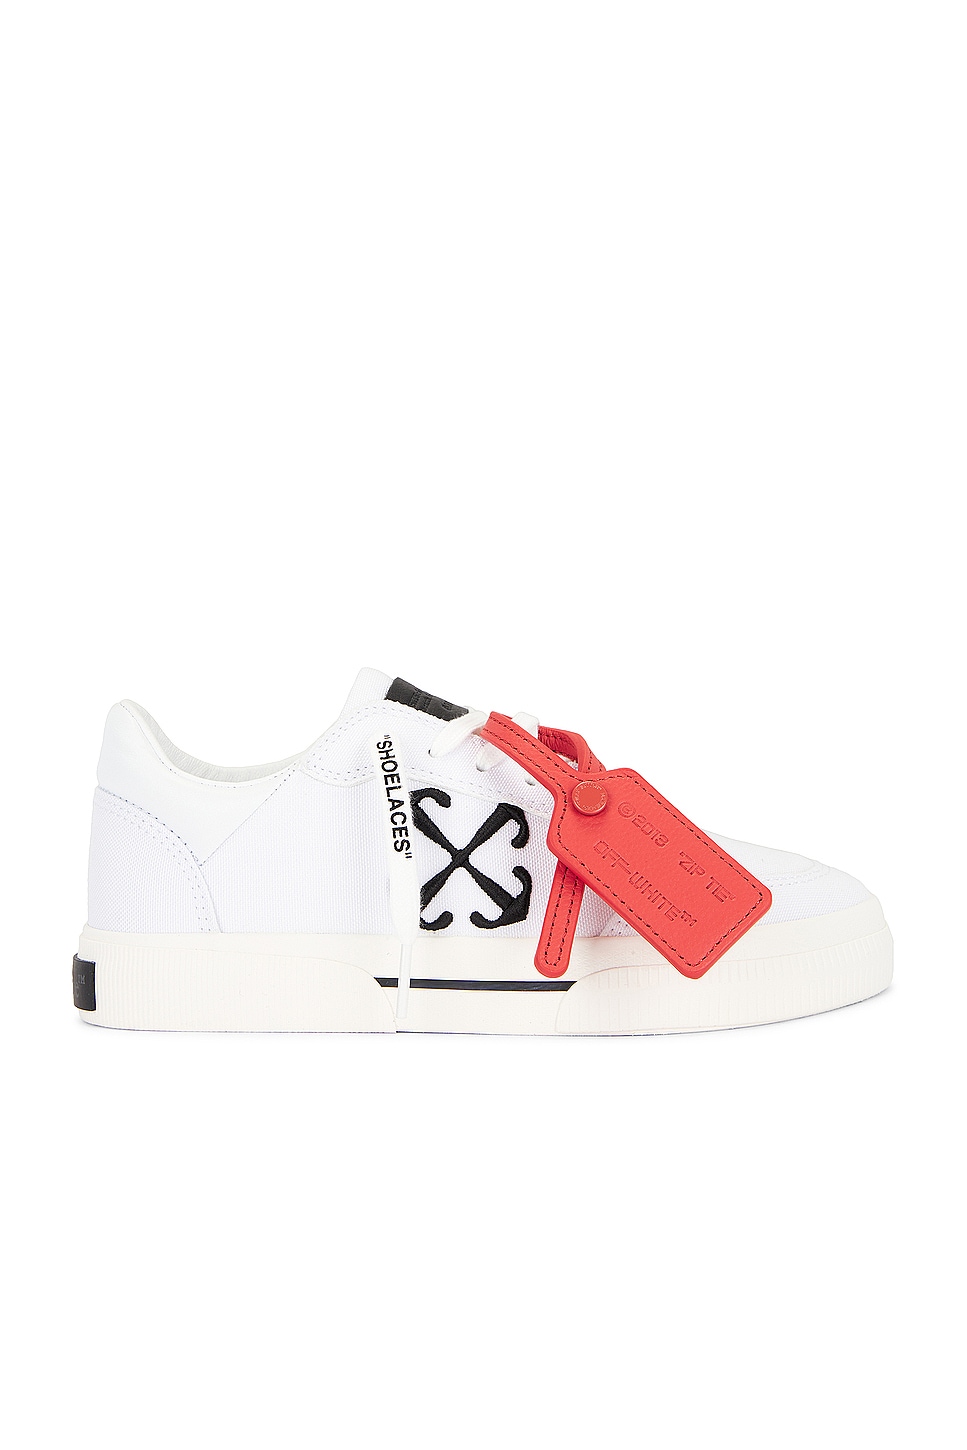 Image 1 of OFF-WHITE New Low Vulcanized Canvas Sneaker in White & Black